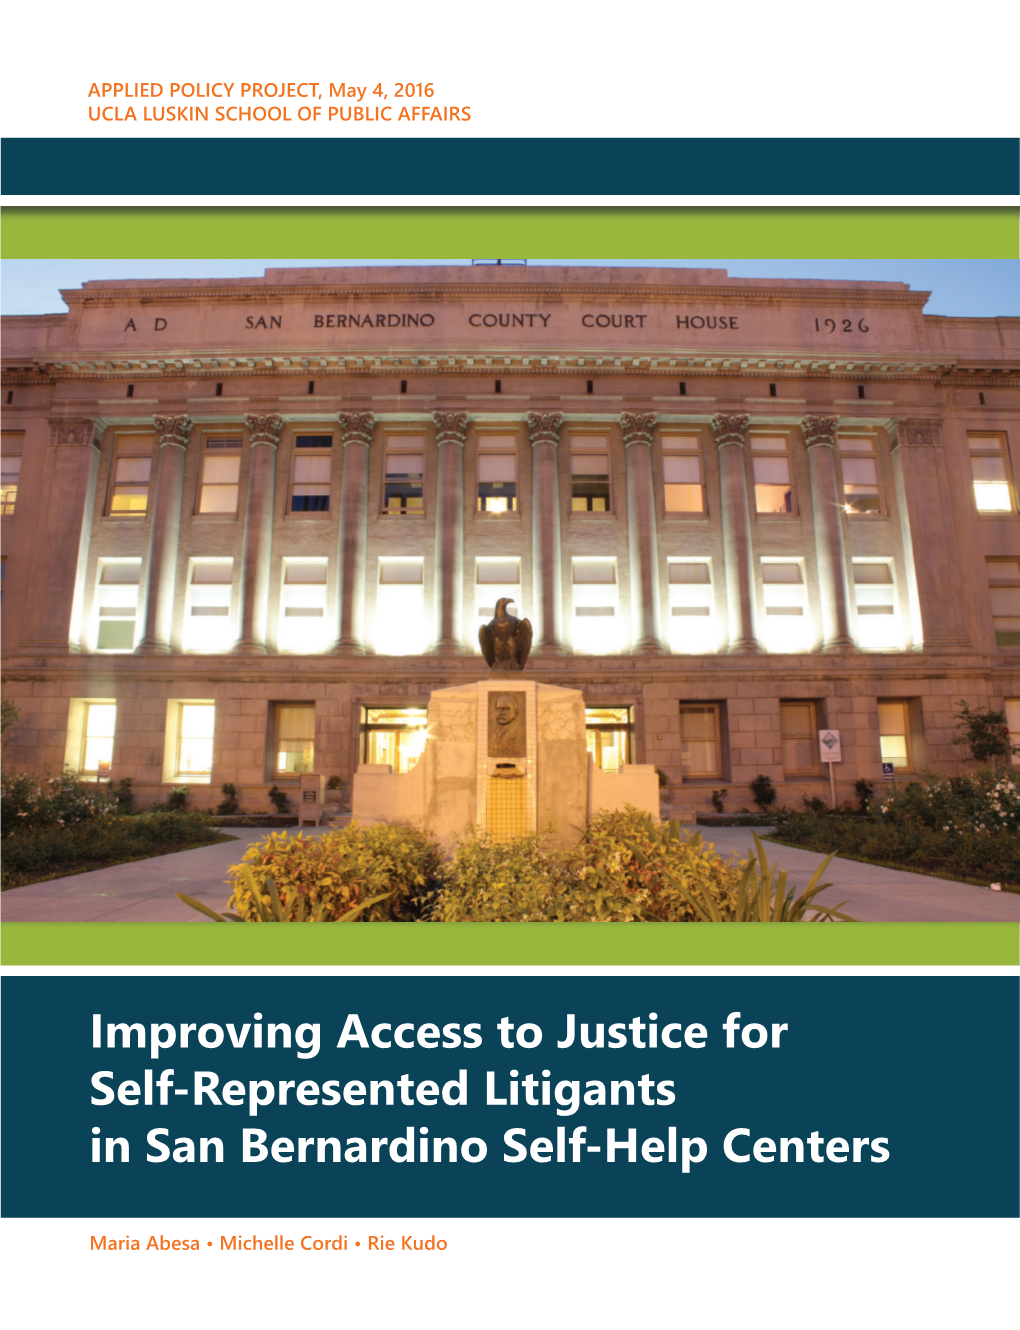 Improving Access to Justice for Self-Represented Litigants in San Bernardino Self-Help Centers